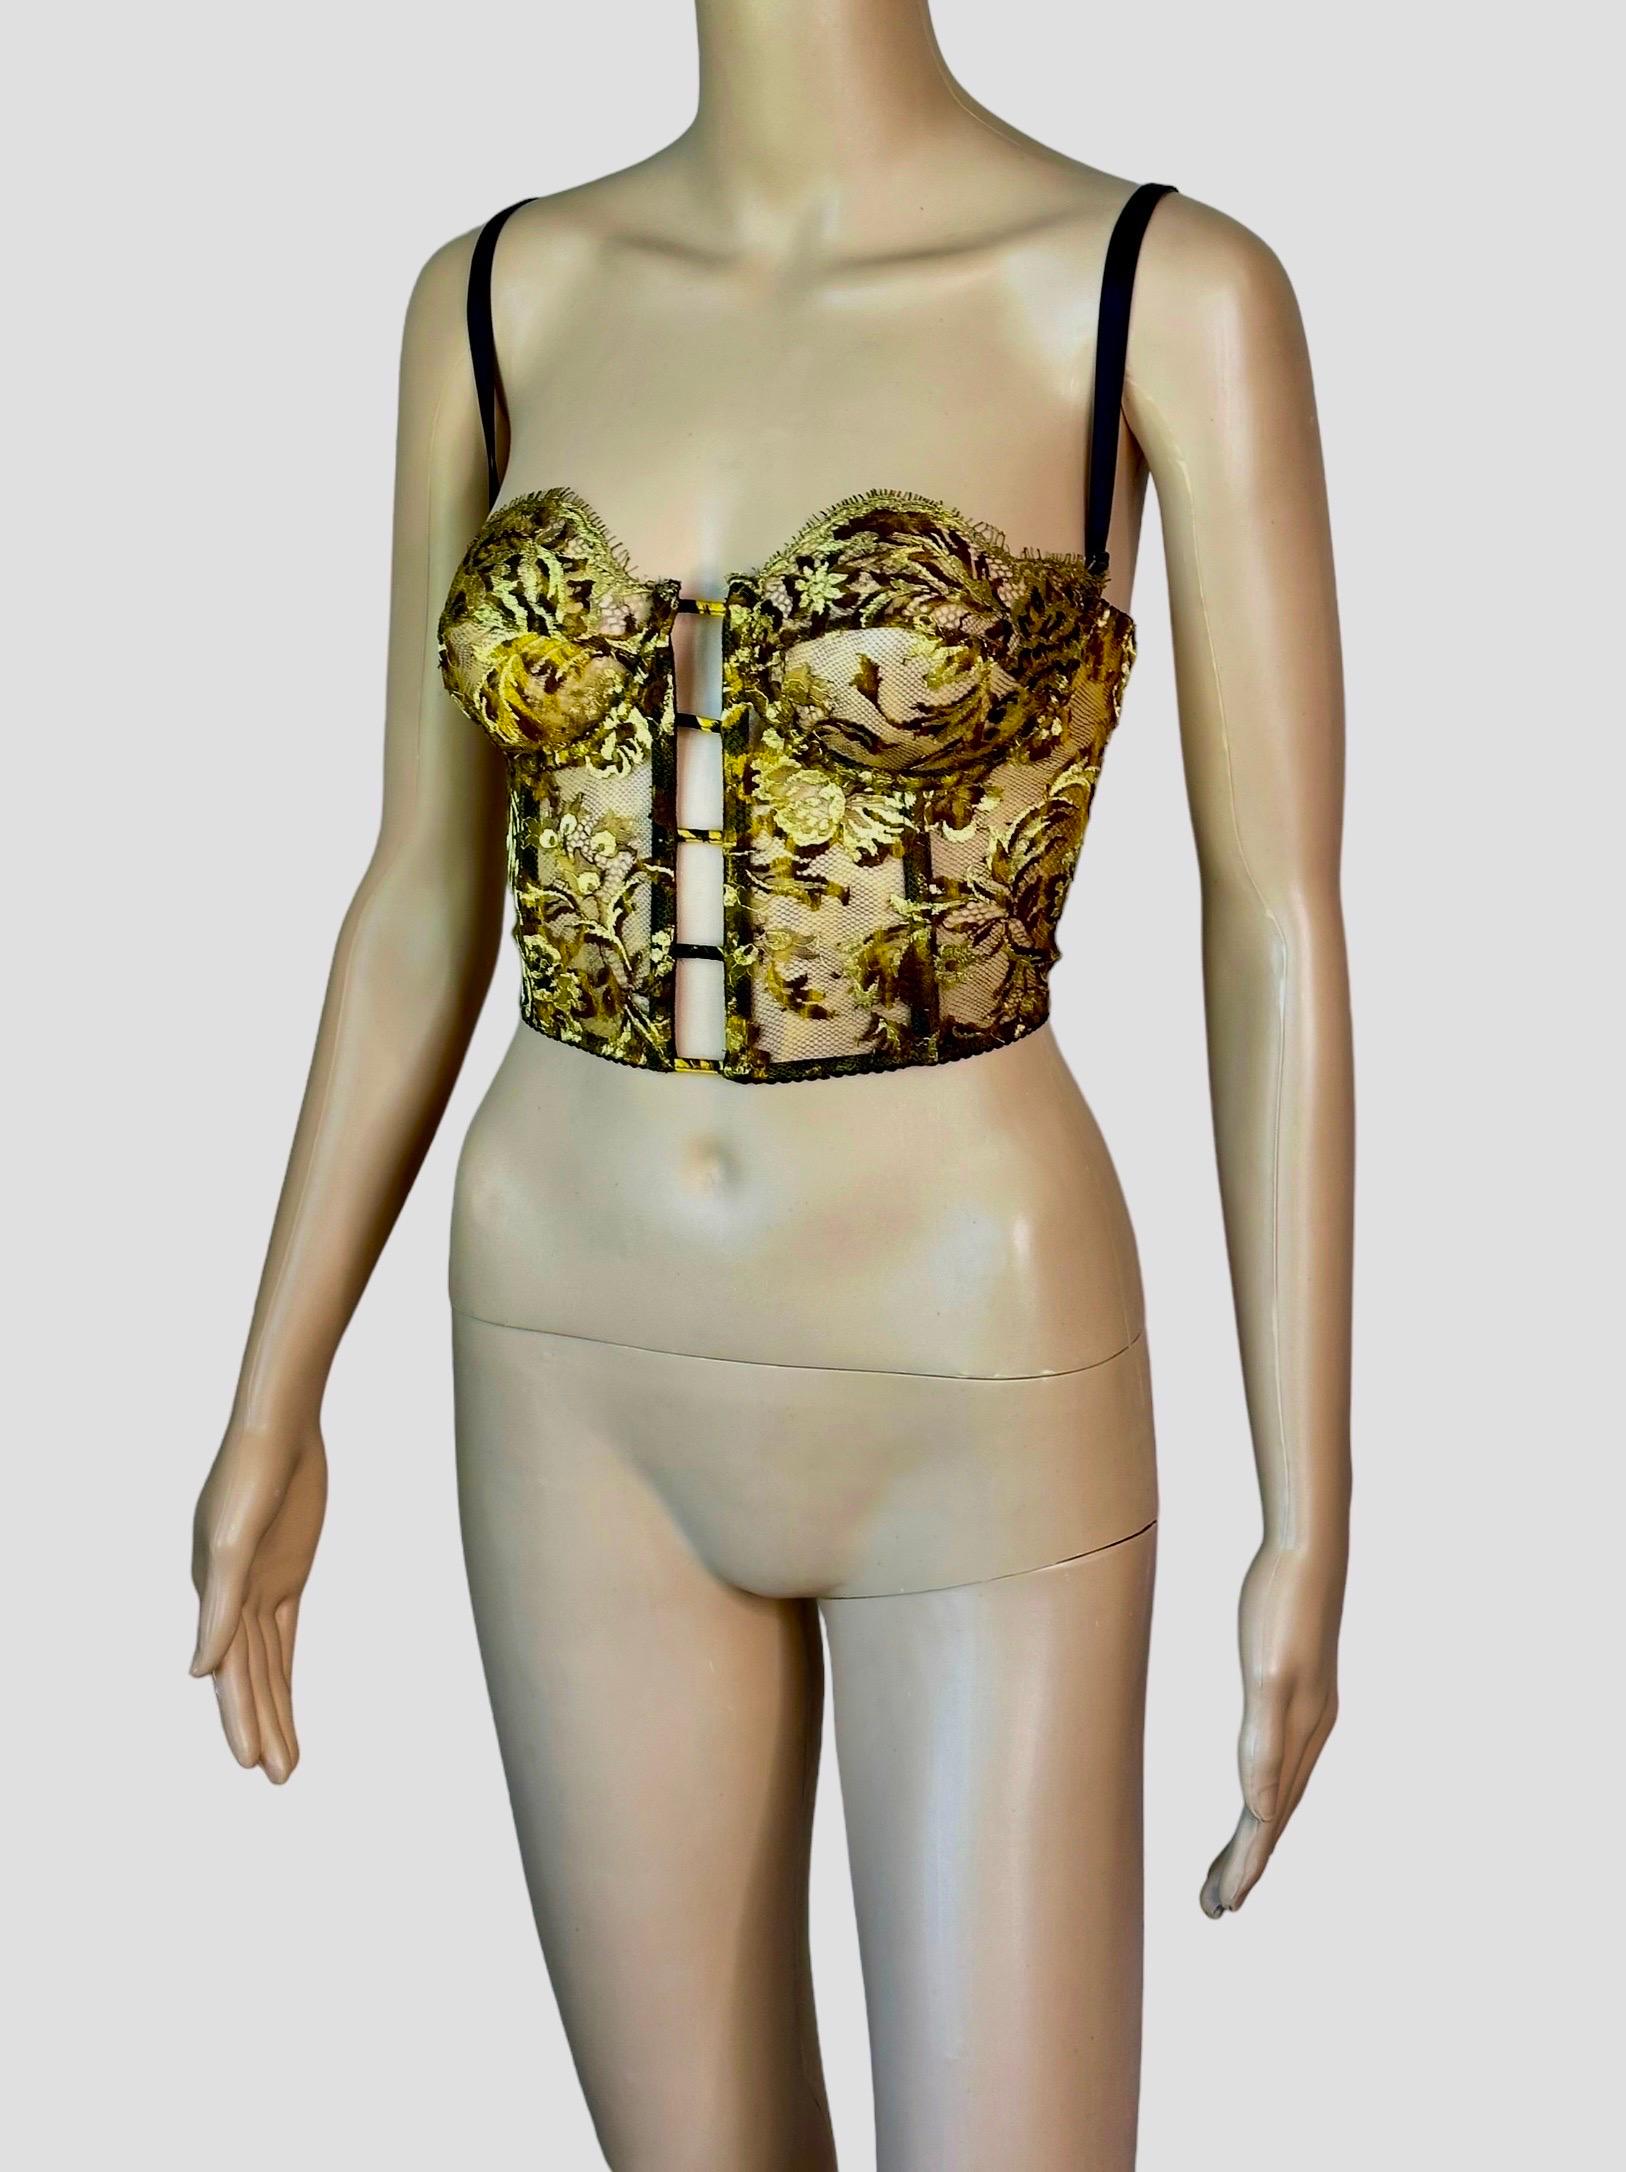 Women's Gianni Versace S/S 1992 Unworn Sheer Gold Embroidered Lace Bustier Bra Crop Top  For Sale